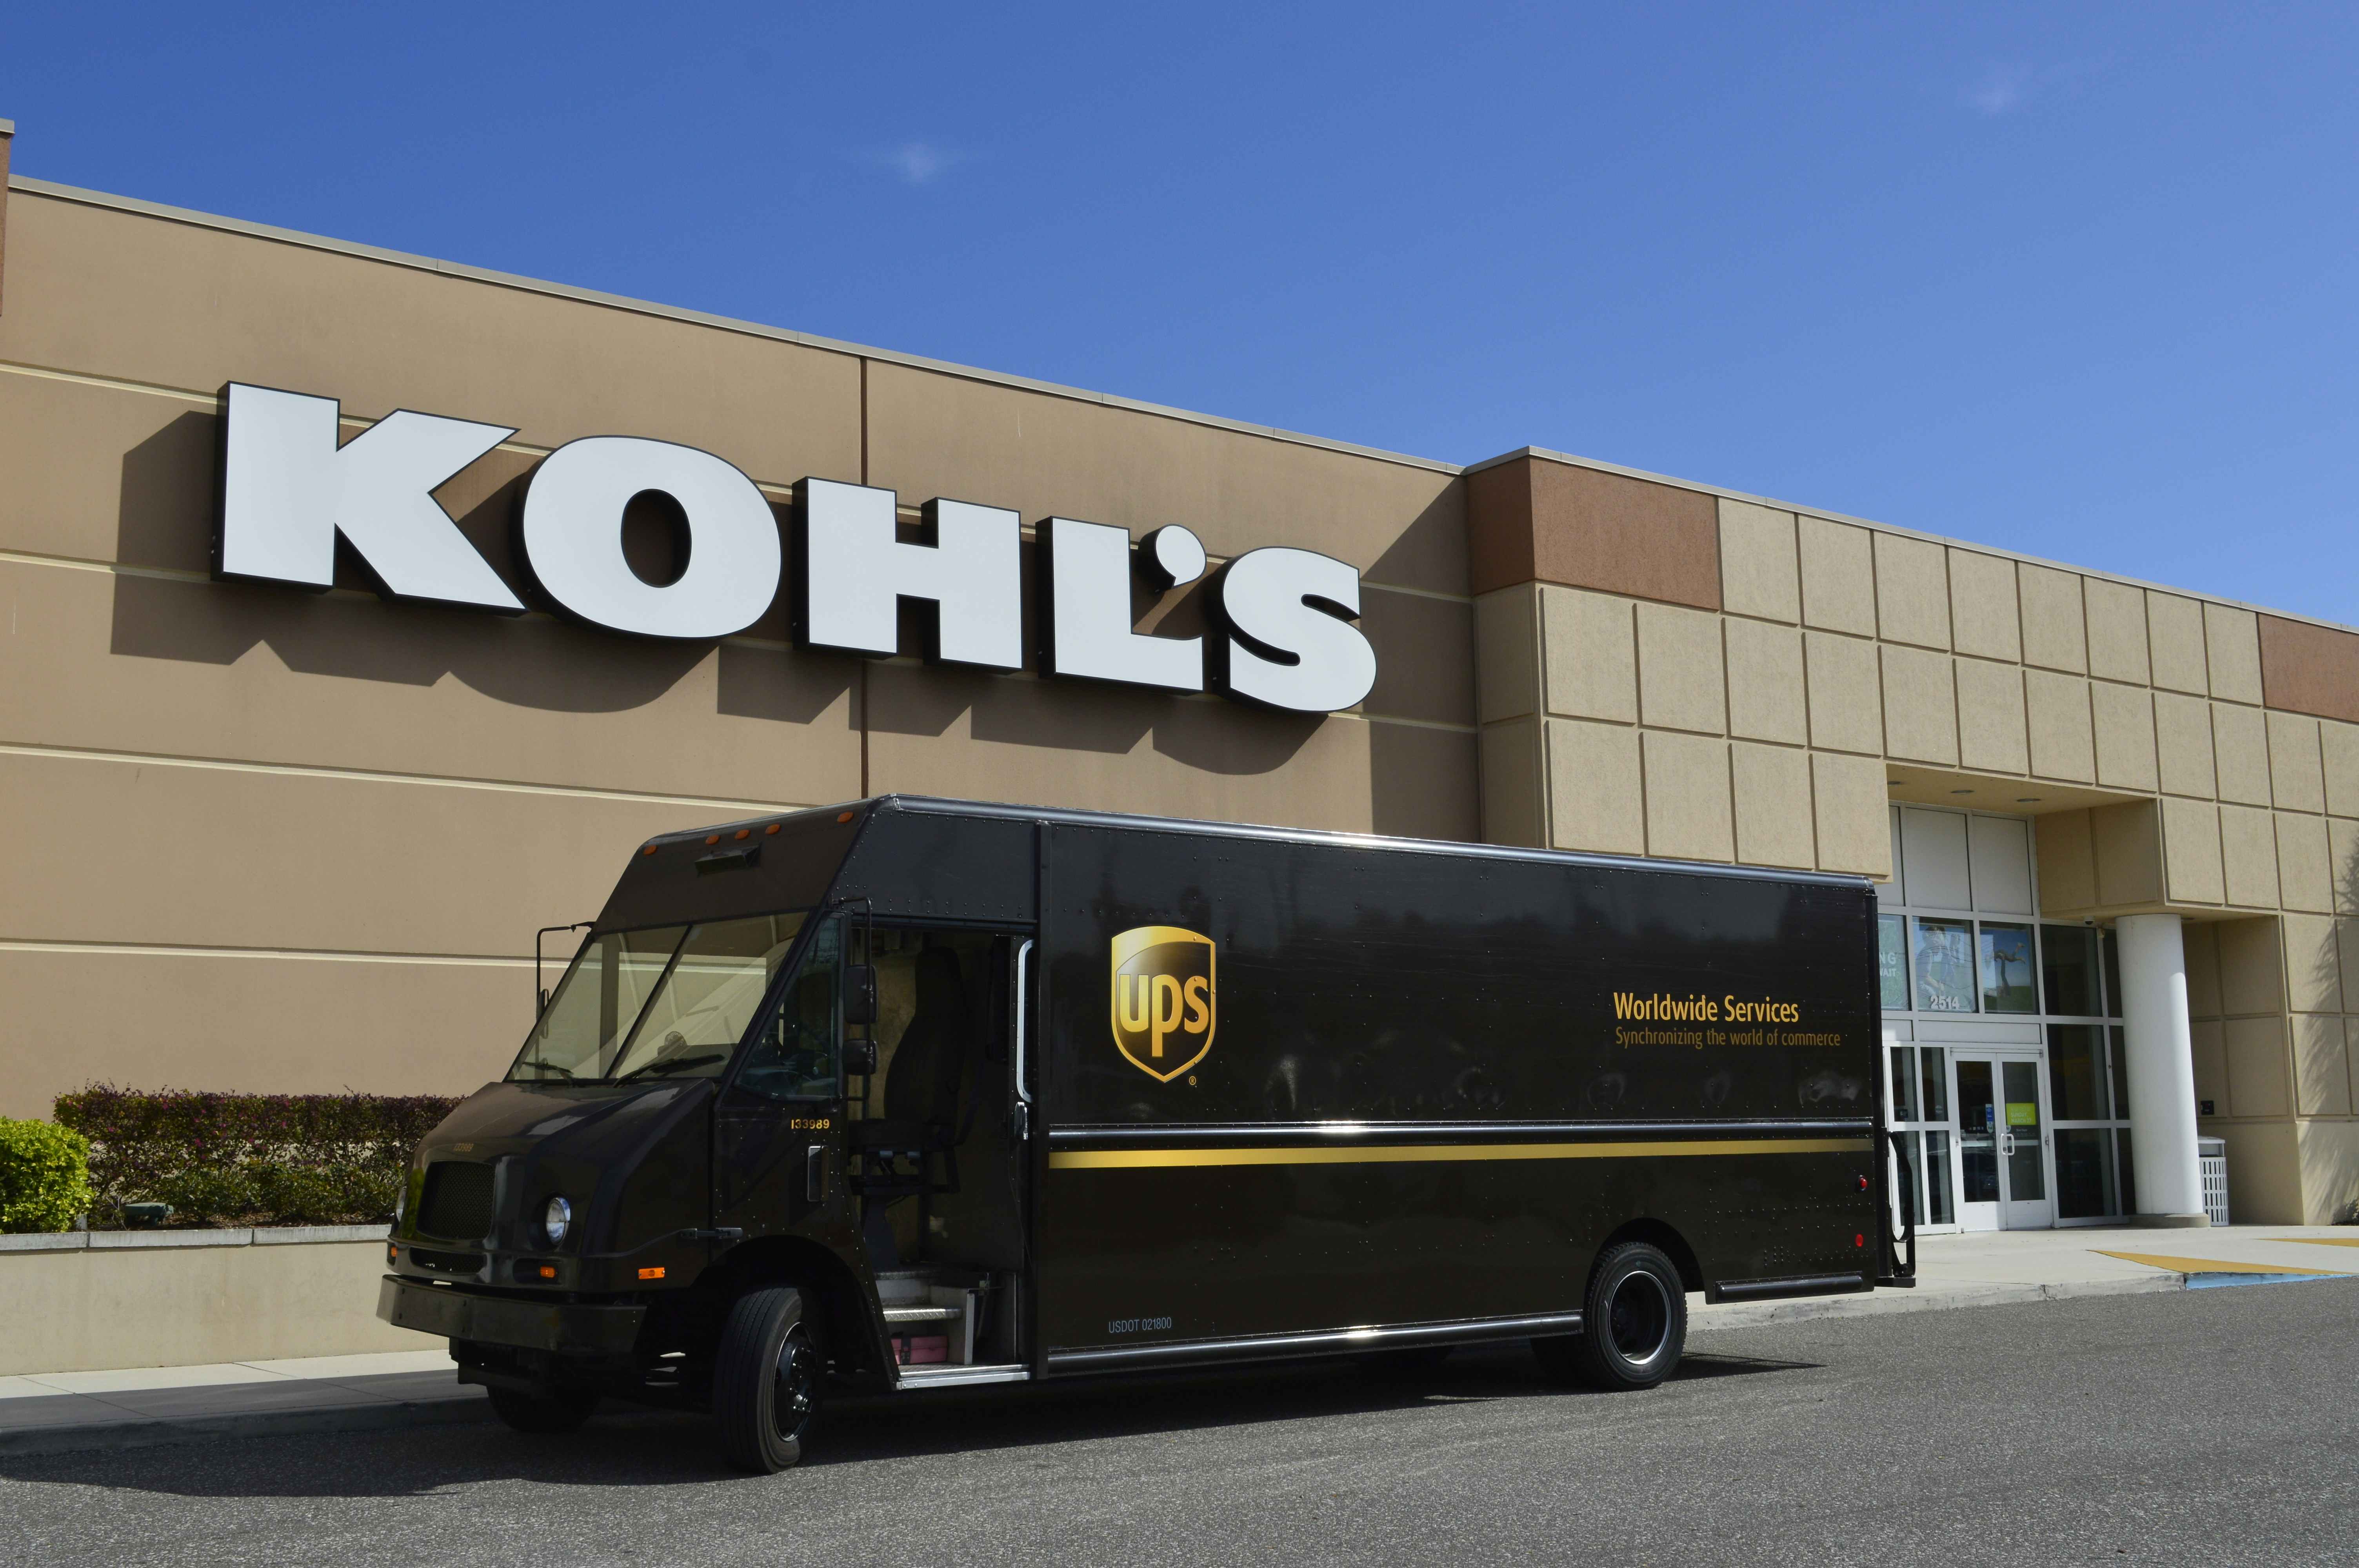 UPS truck in front of a Kohl's store